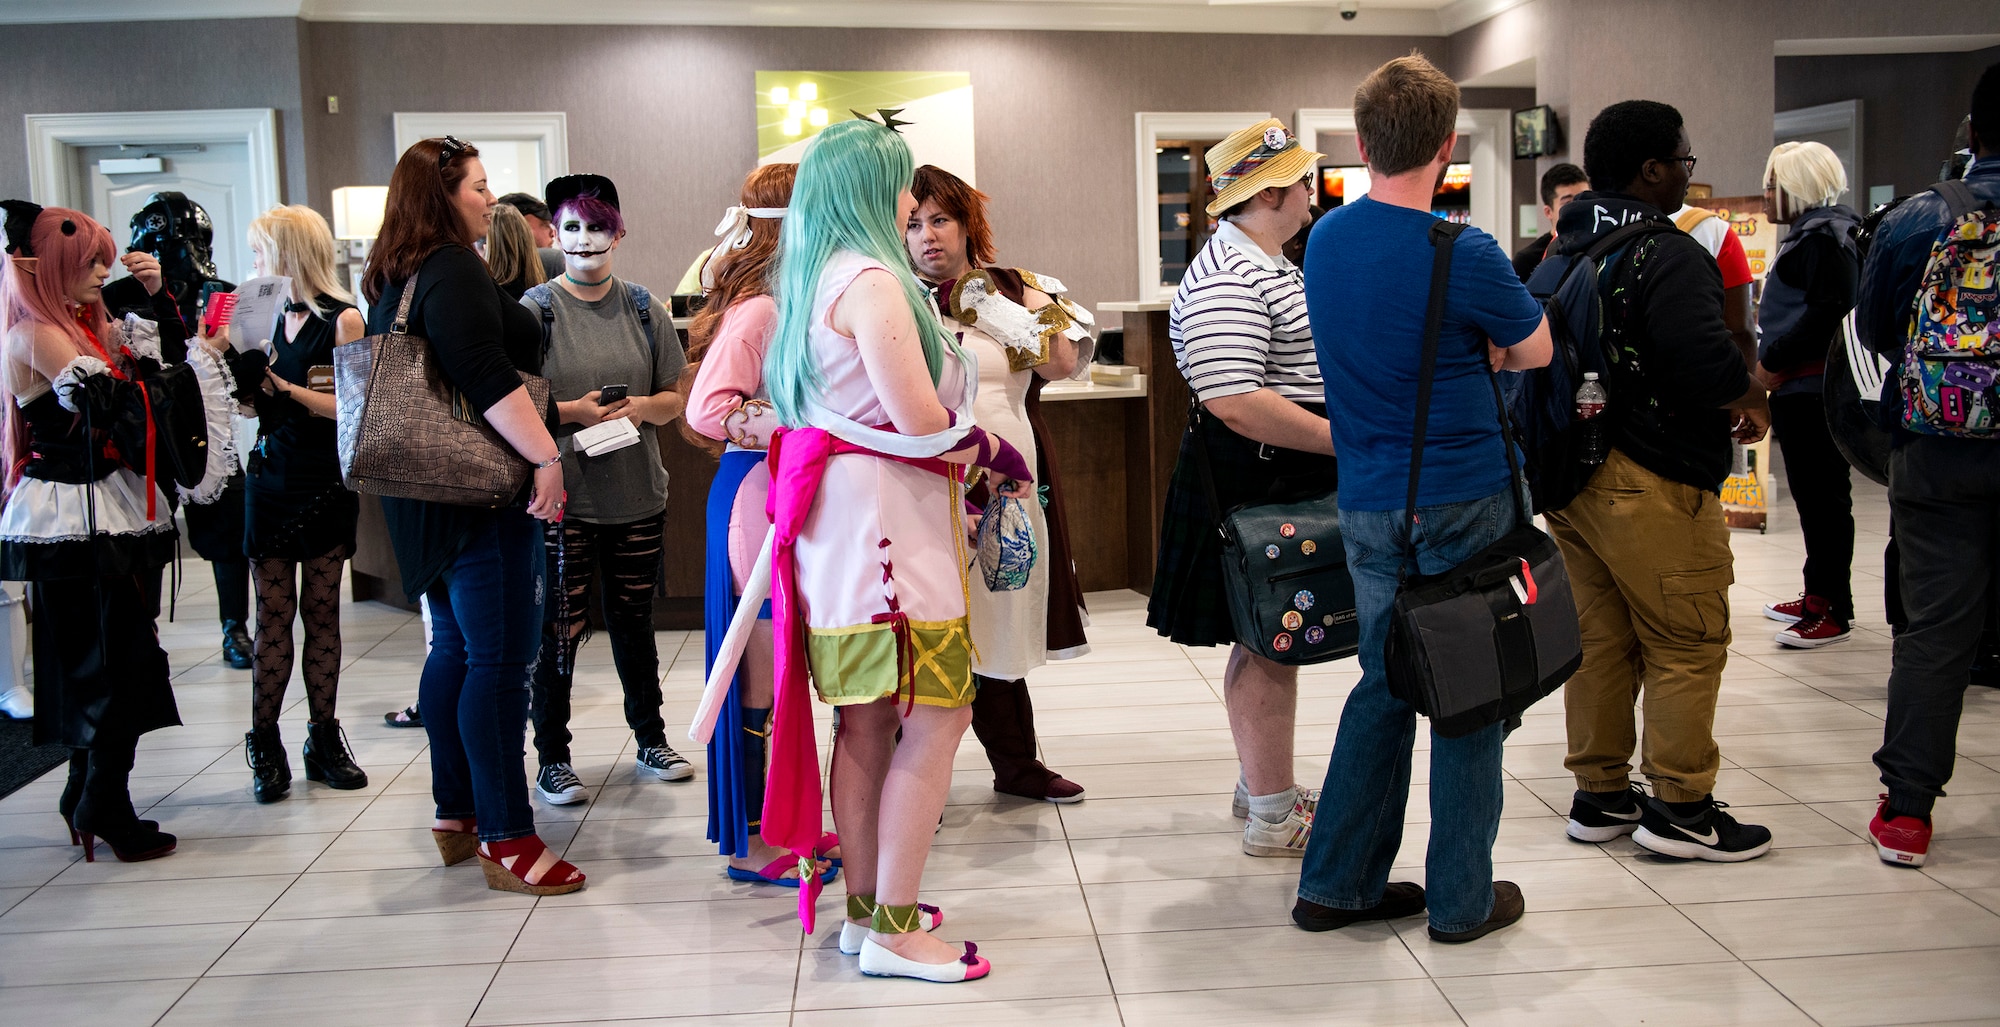 Guests wait in line to register for Tiger Con, April 14, 2018, in Valdosta, Ga. Tiger Con was a convention, open to Moody residents and the local community, geared toward giving pop culture enthusiasts a chance to dress and role play as their favorite movie, TV show or comic characters. The event included a costume contest, an anime themed café, pop-culture artist panels along with shopping vendors and a guest appearance of veteran voice actor Richard Epcar, who’s known for portraying Raiden in the video series Mortal Kombat. (U.S. Air Force photo by Airman 1st Class Erick Requadt)